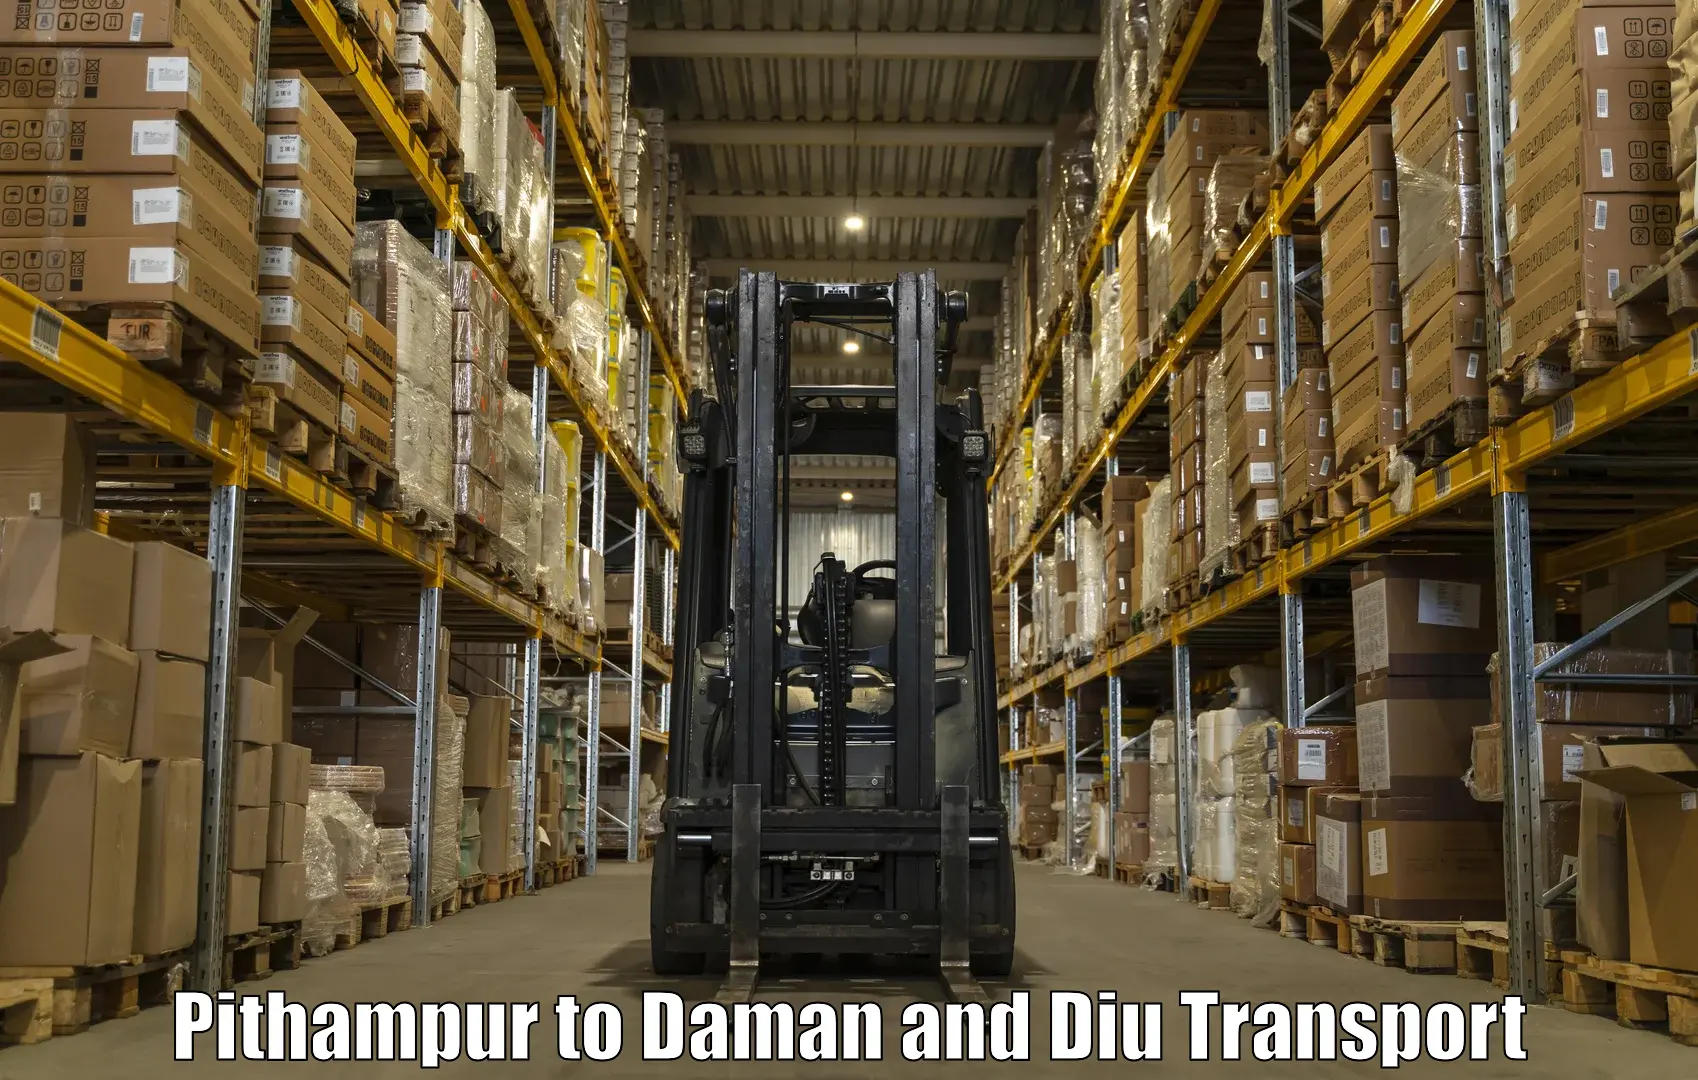 Air freight transport services Pithampur to Daman and Diu